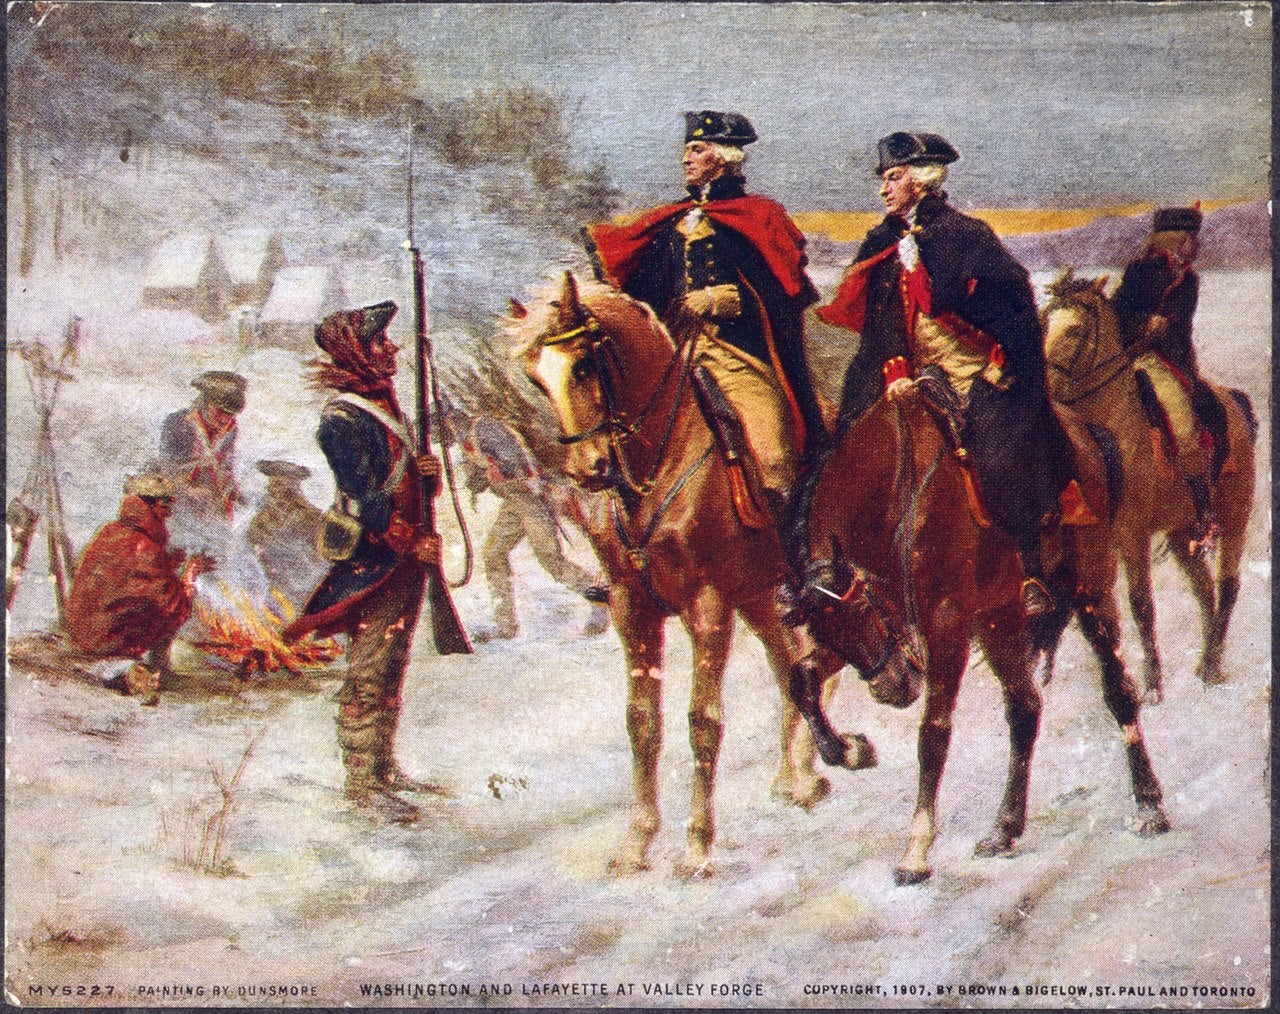 A painting depicting George Washington and the Marquis de Lafayette at the Valley Forge winter camp. (John Ward Dunsmore, Public domain, via Wikimedia Commons)